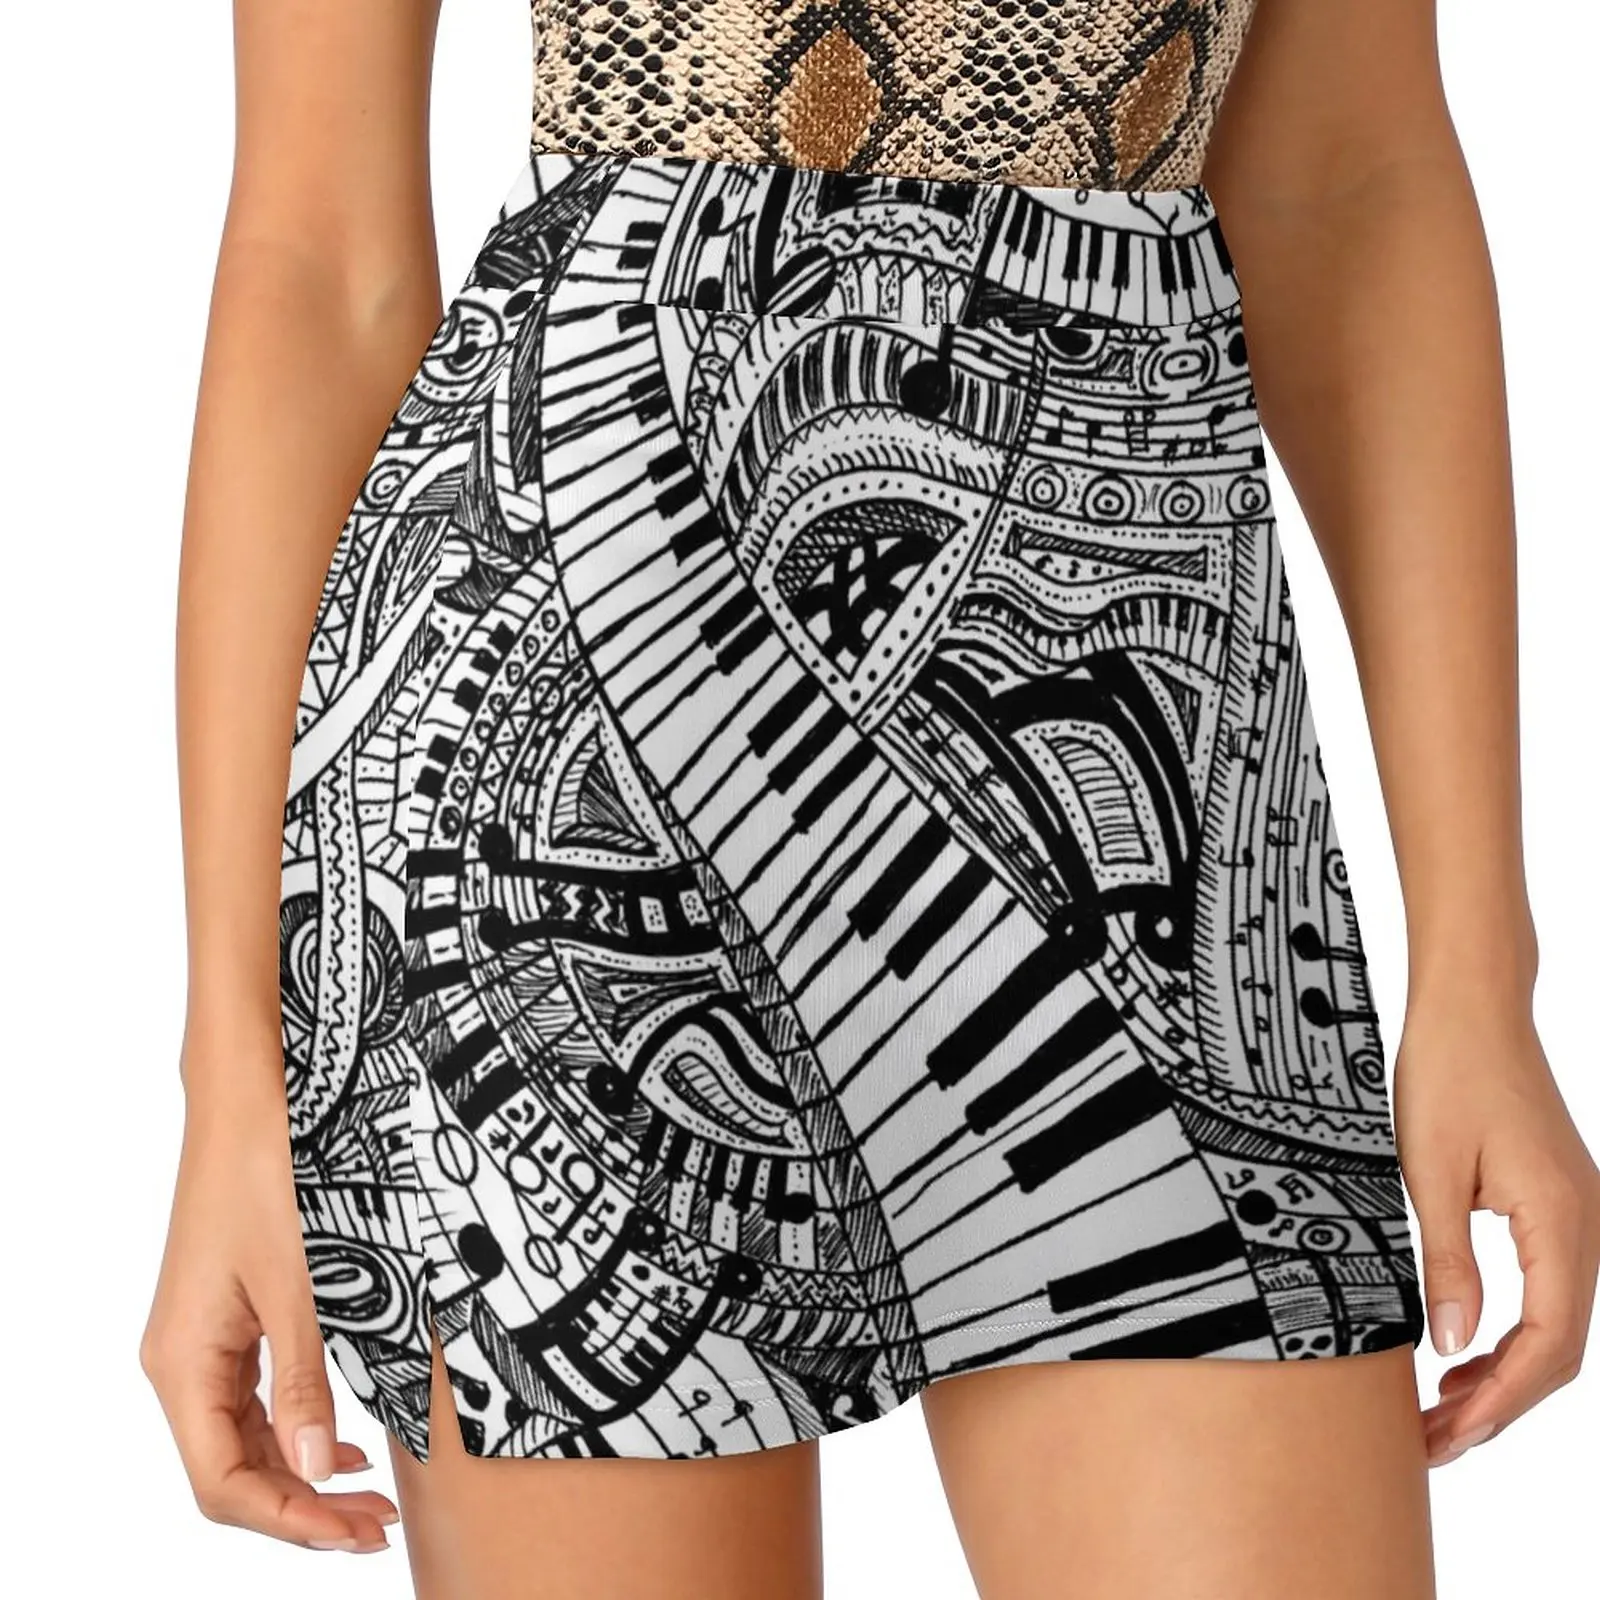 Classical music doodle with piano keyboard Light Proof Trouser Skirt novelty in clothes festival outfit women extreme mini dress рок ear music blackmore s night nature s light yellow vinyl